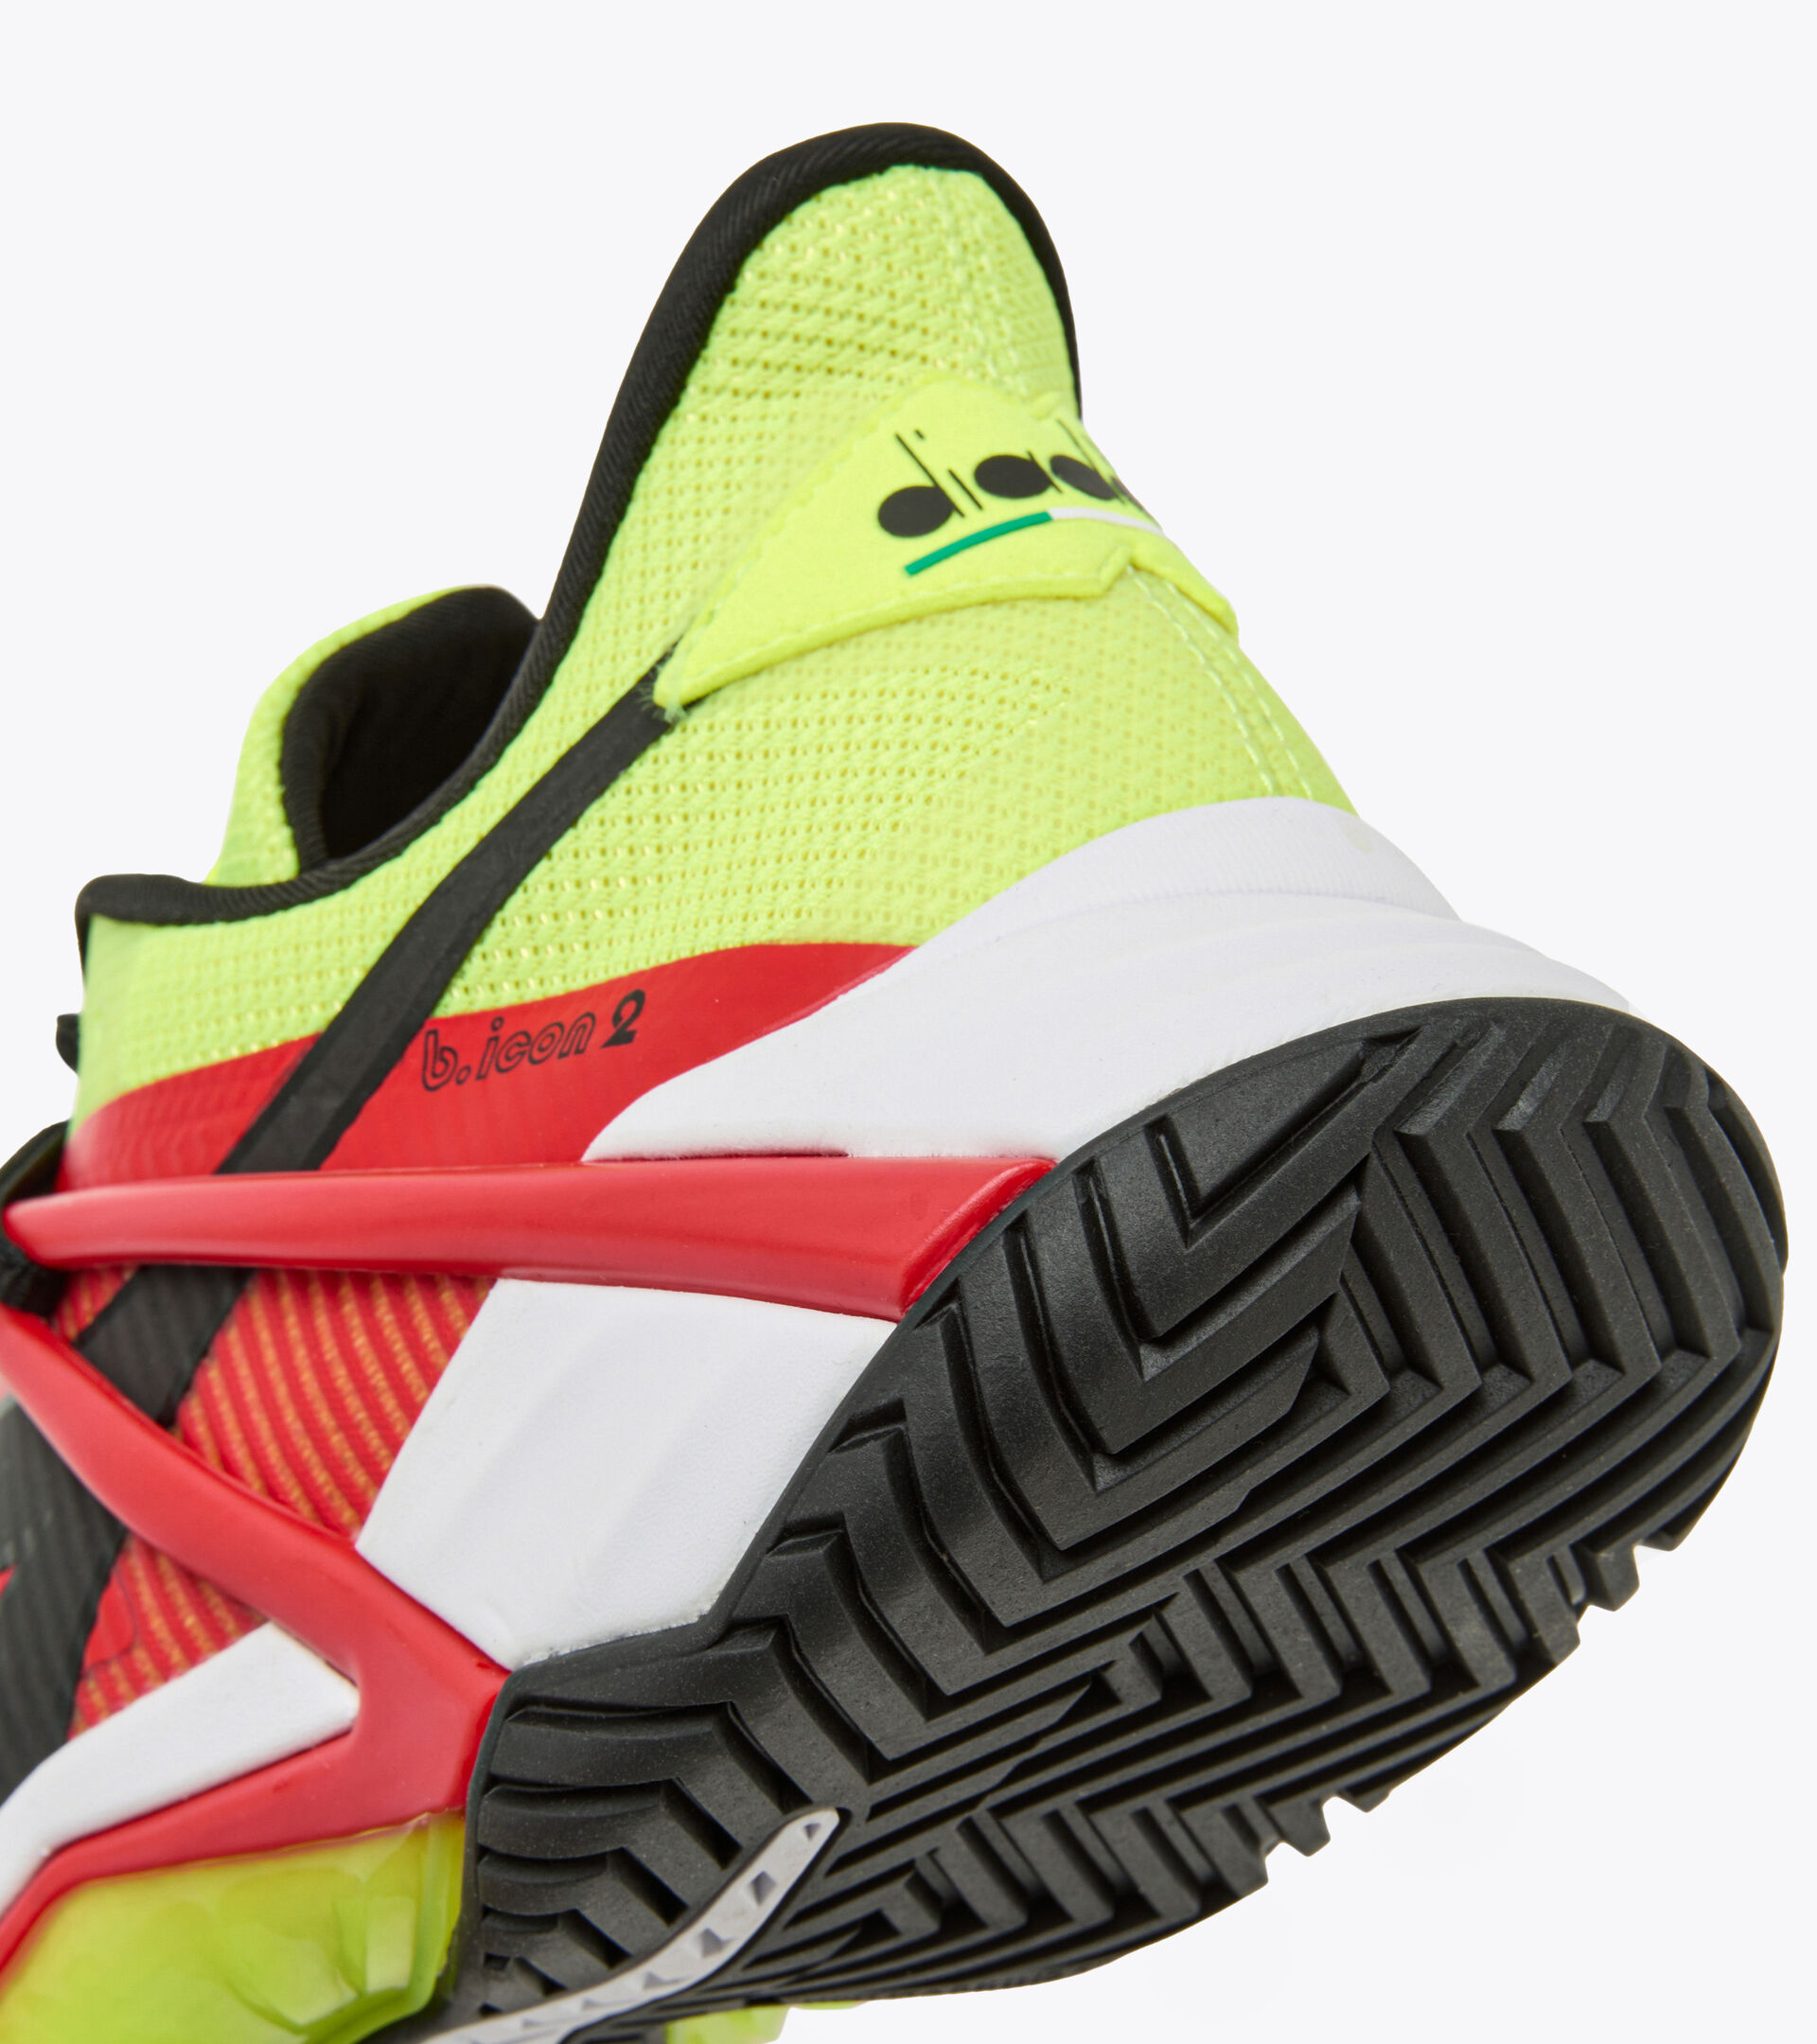 Tennis shoes for hard surfaces or clay - Men B.ICON 2 AG YELLOW FLUO DD/BLK/FIERY RED - Diadora